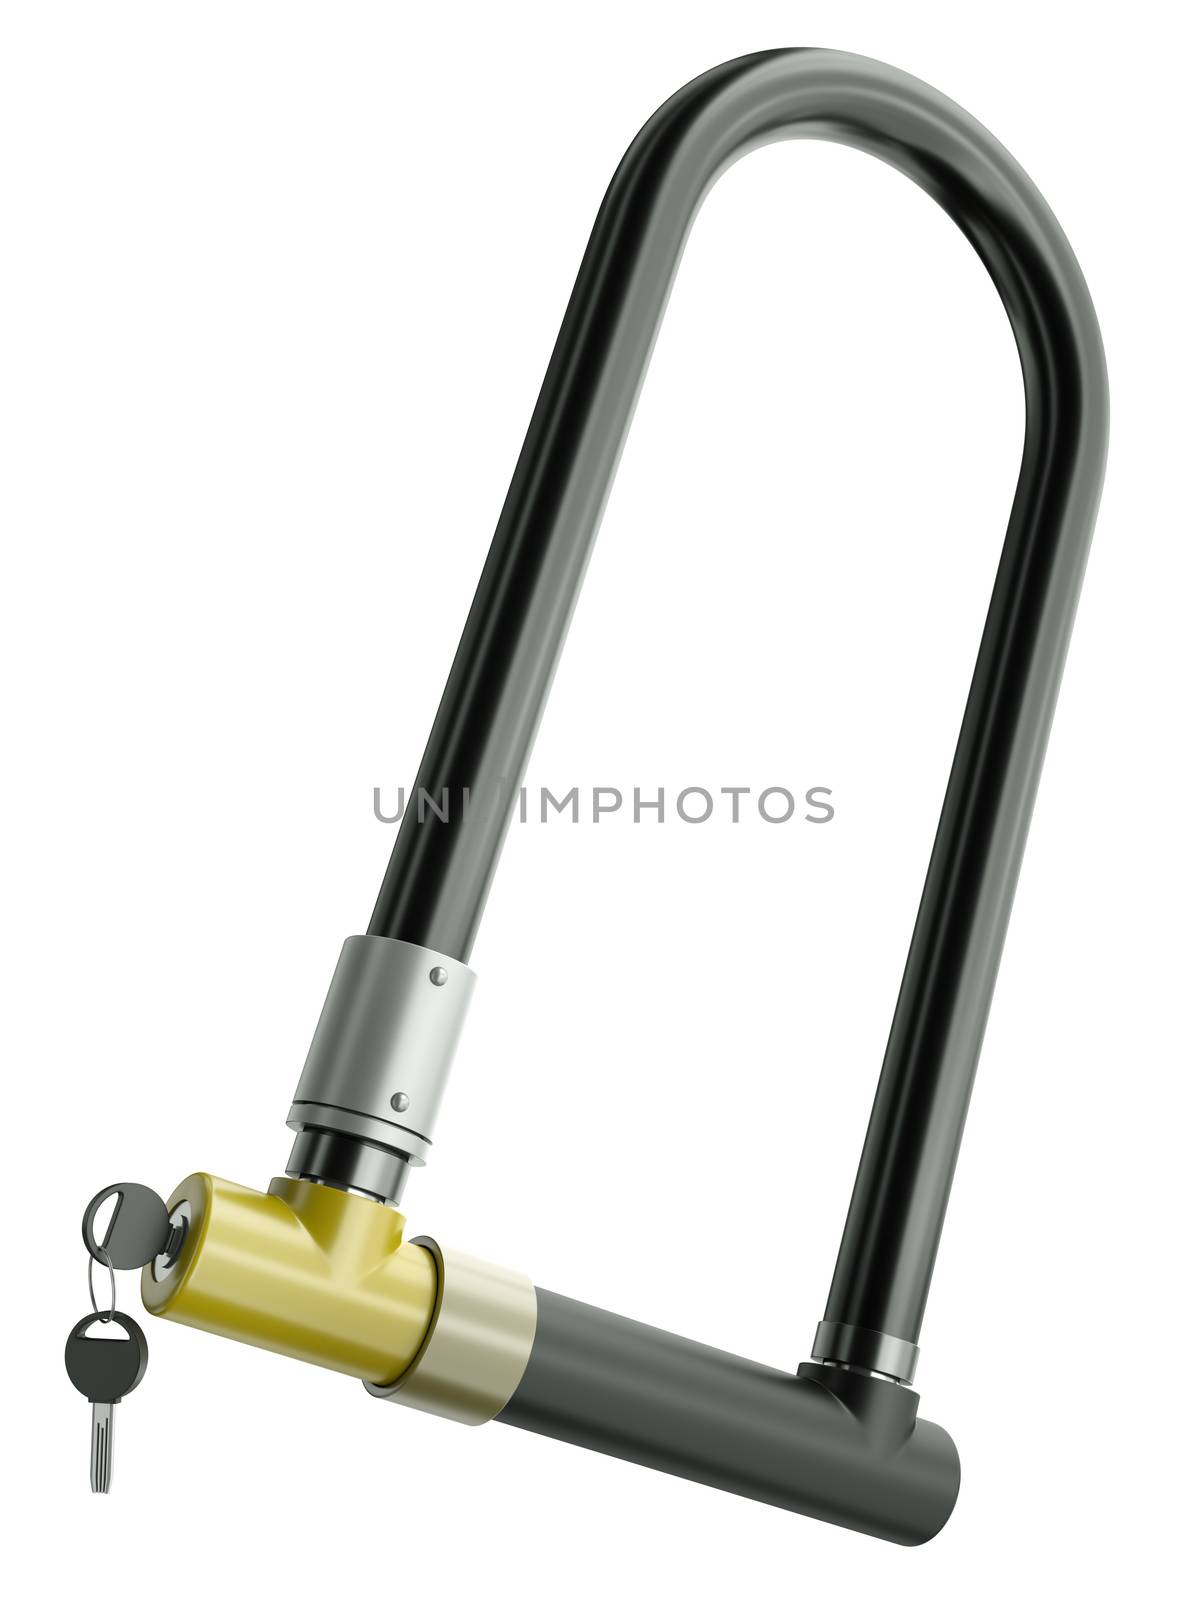 Bicycle lock, also called U-lock or D-lock, isolated on a white bakcground. 3D render.